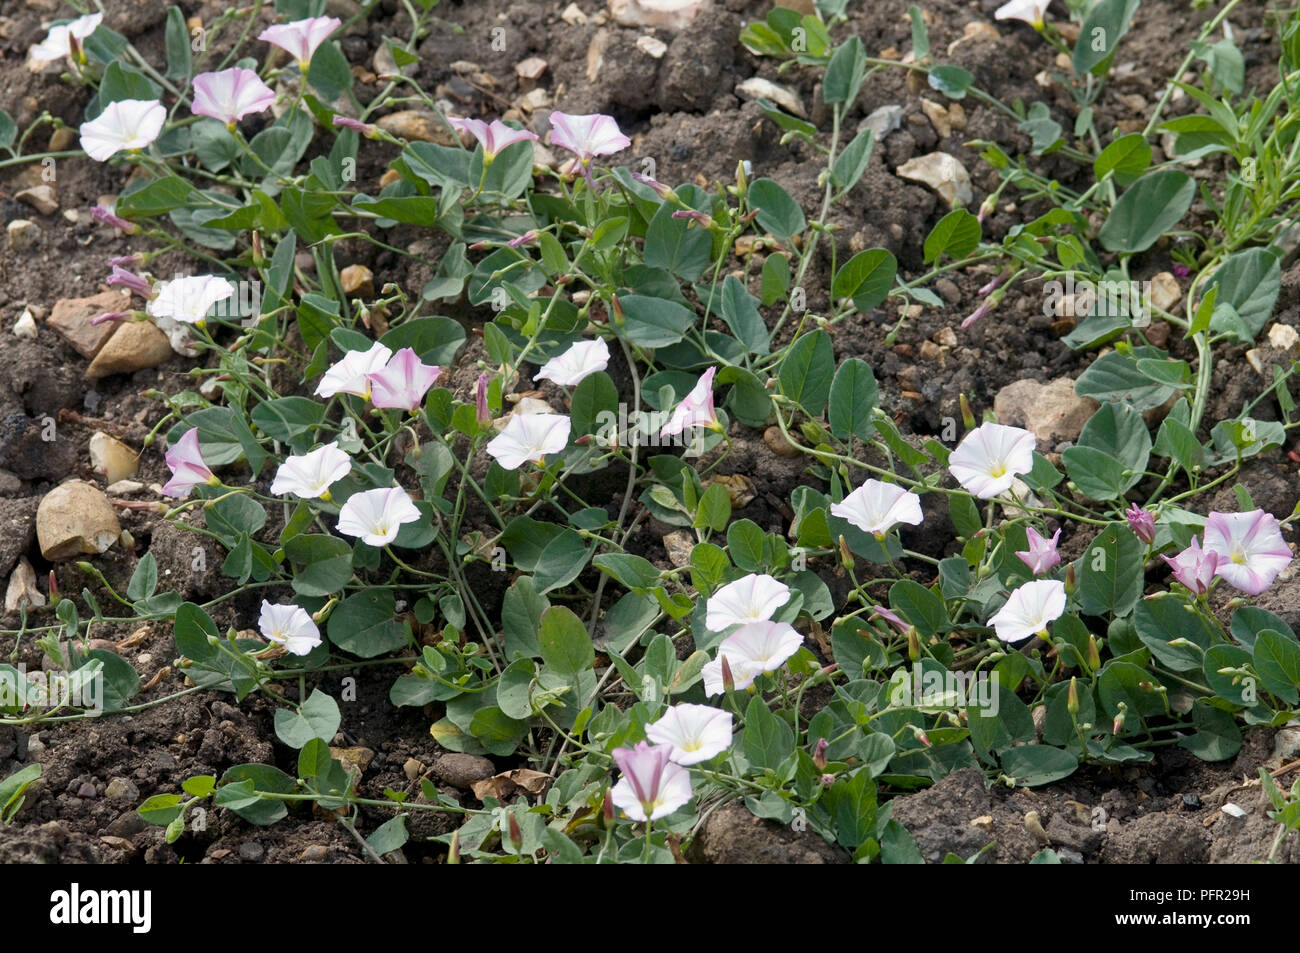 Convolvulus arvensis (Field bindweed), flowers and leaves of weed plant Stock Photo